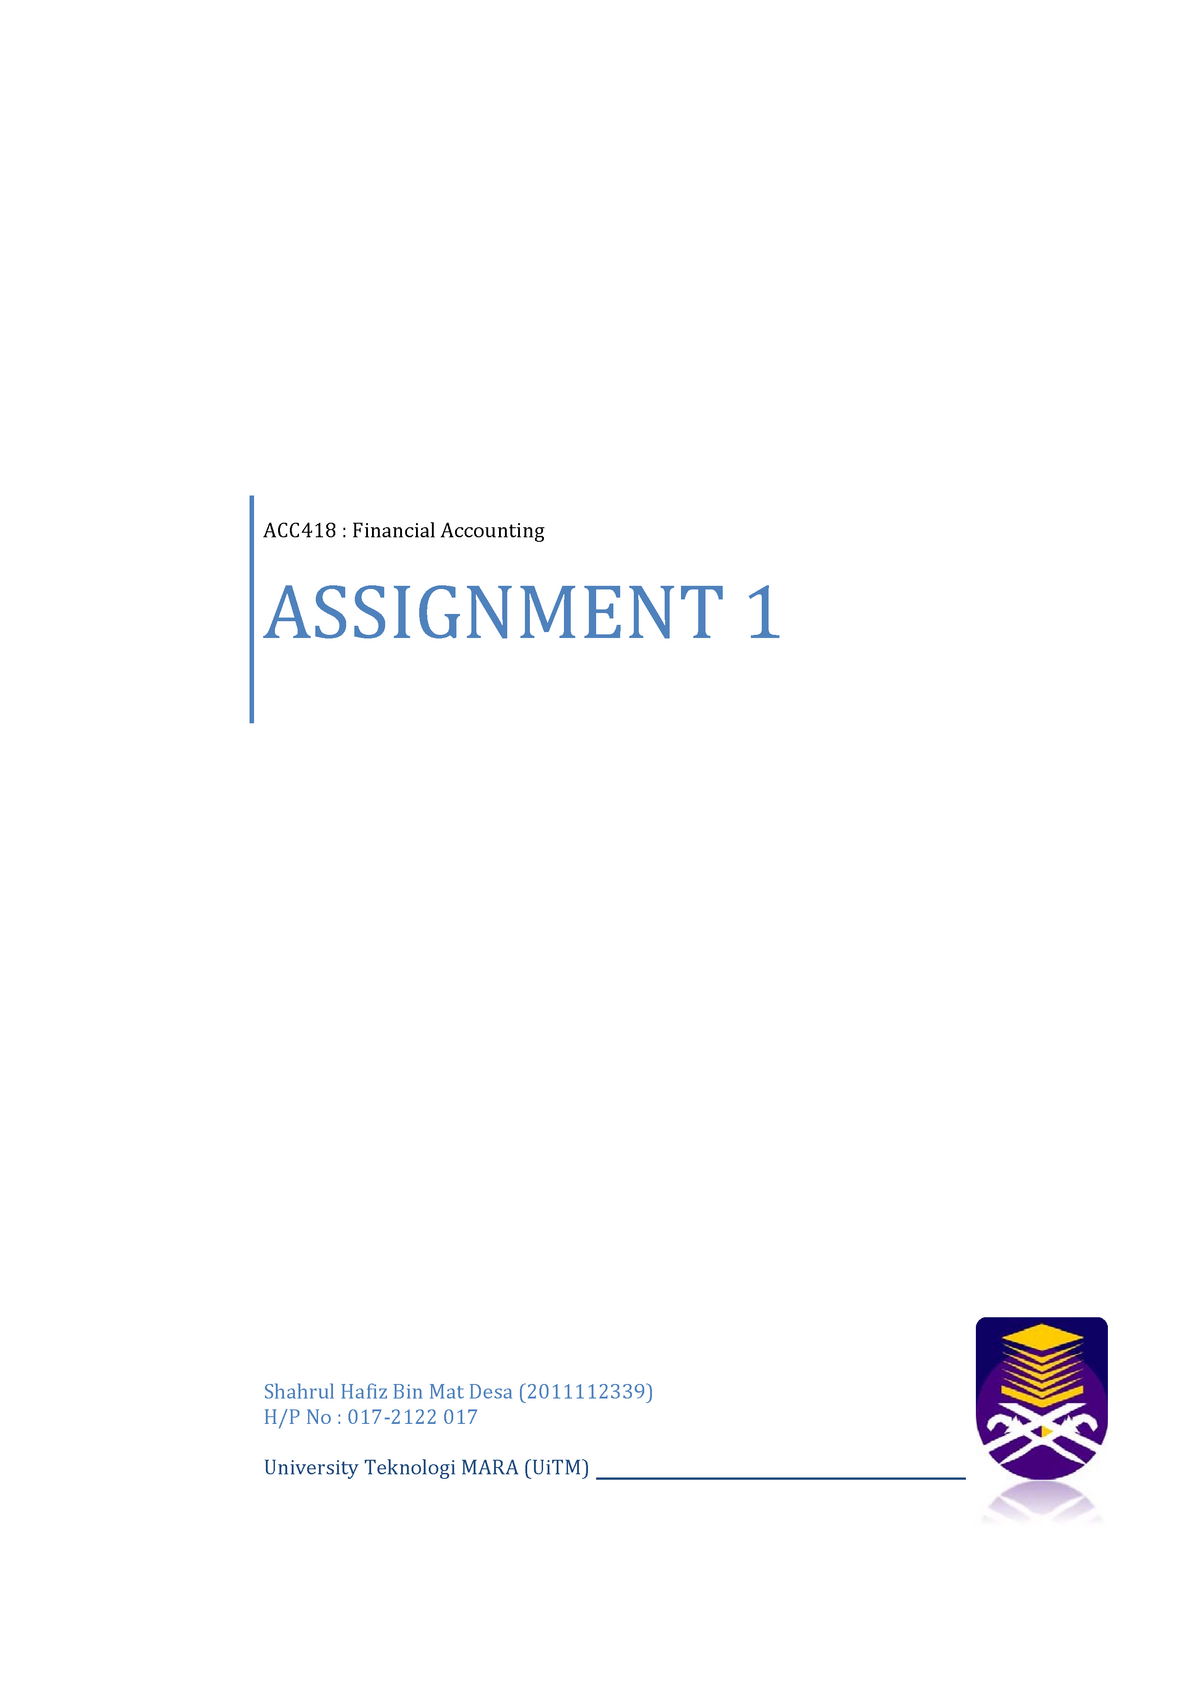 accounting 1 assignment